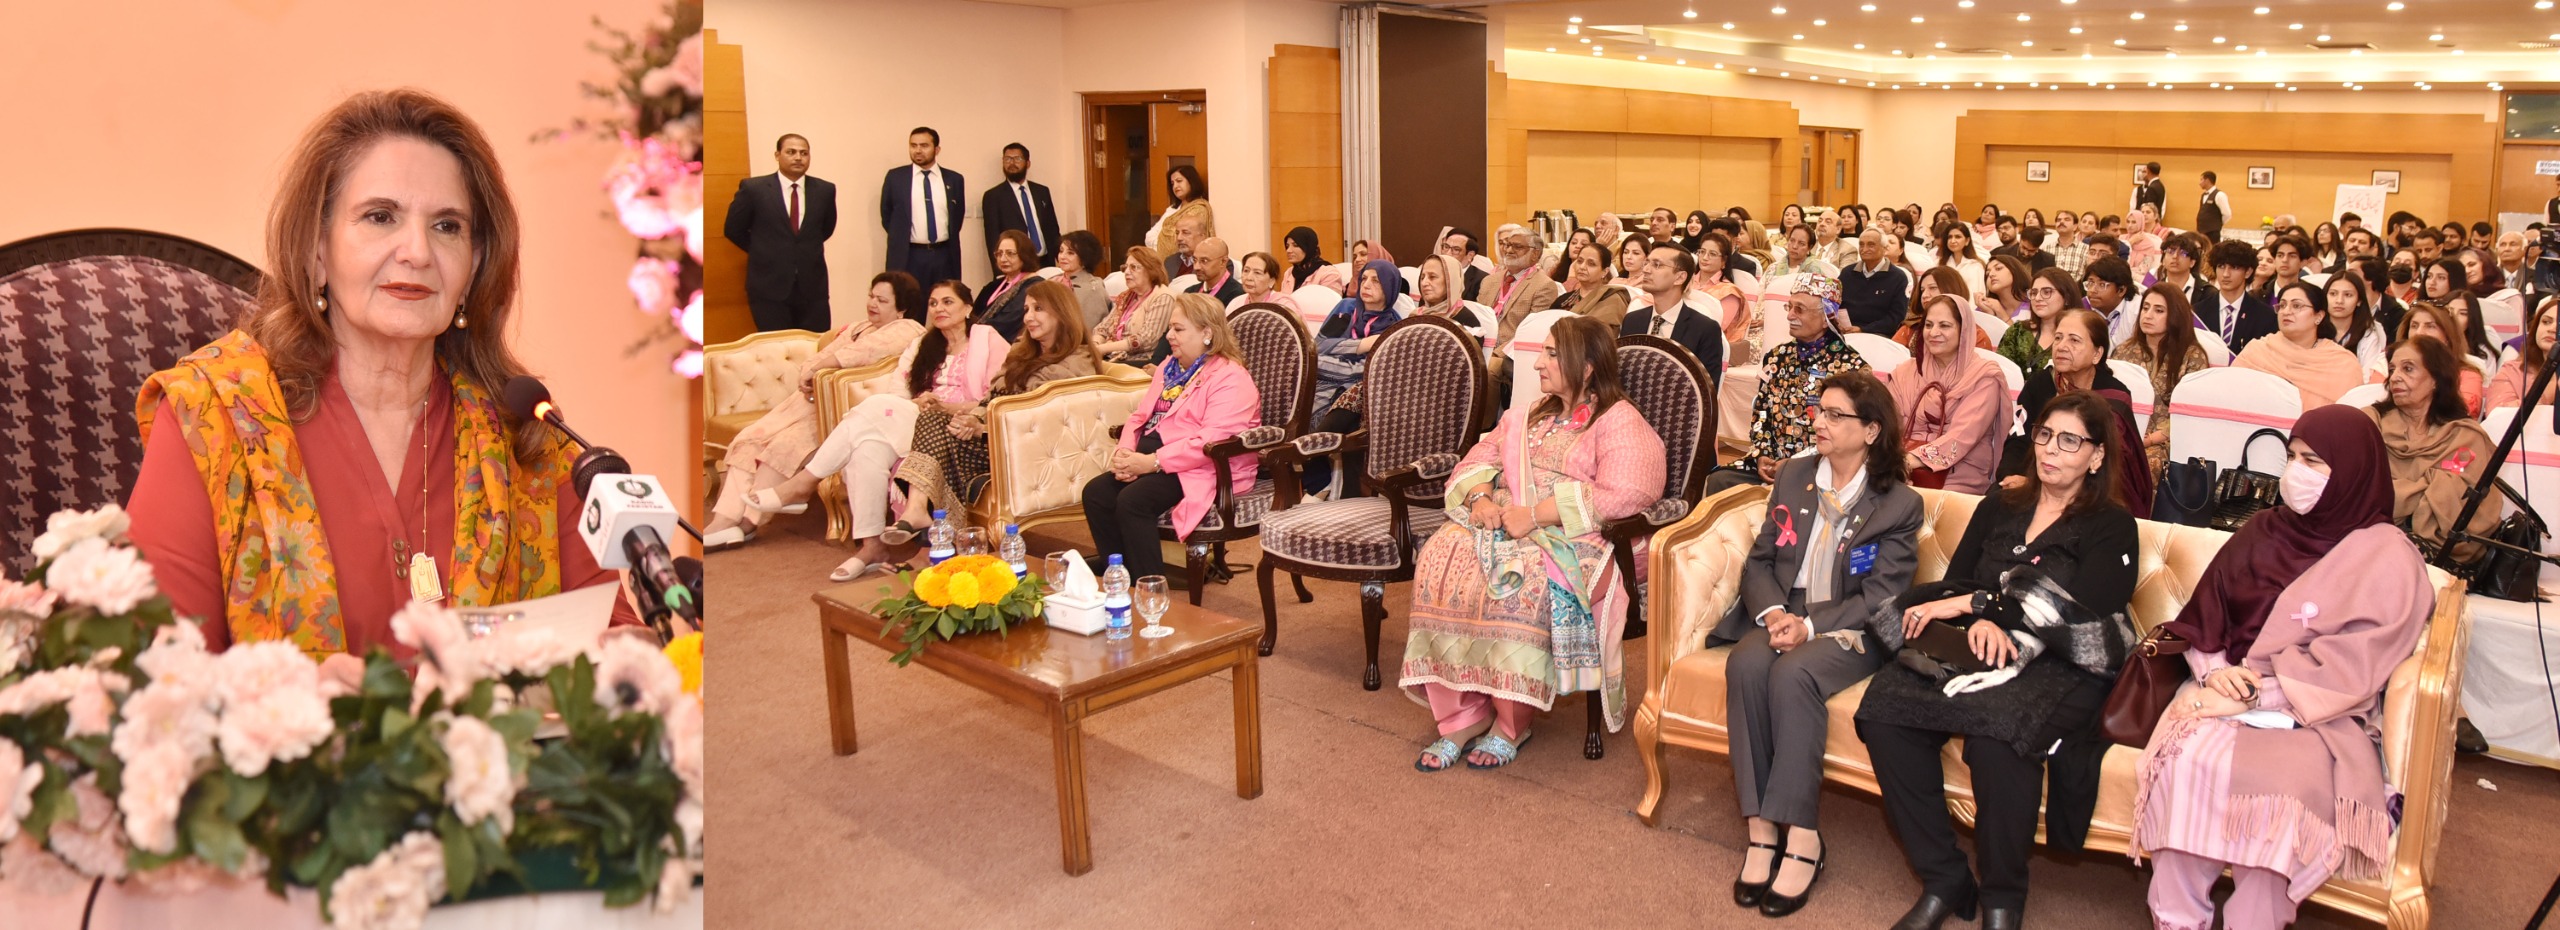 First lady seeks support for raising awareness on breast cancer, mental health, rights of disabled persons